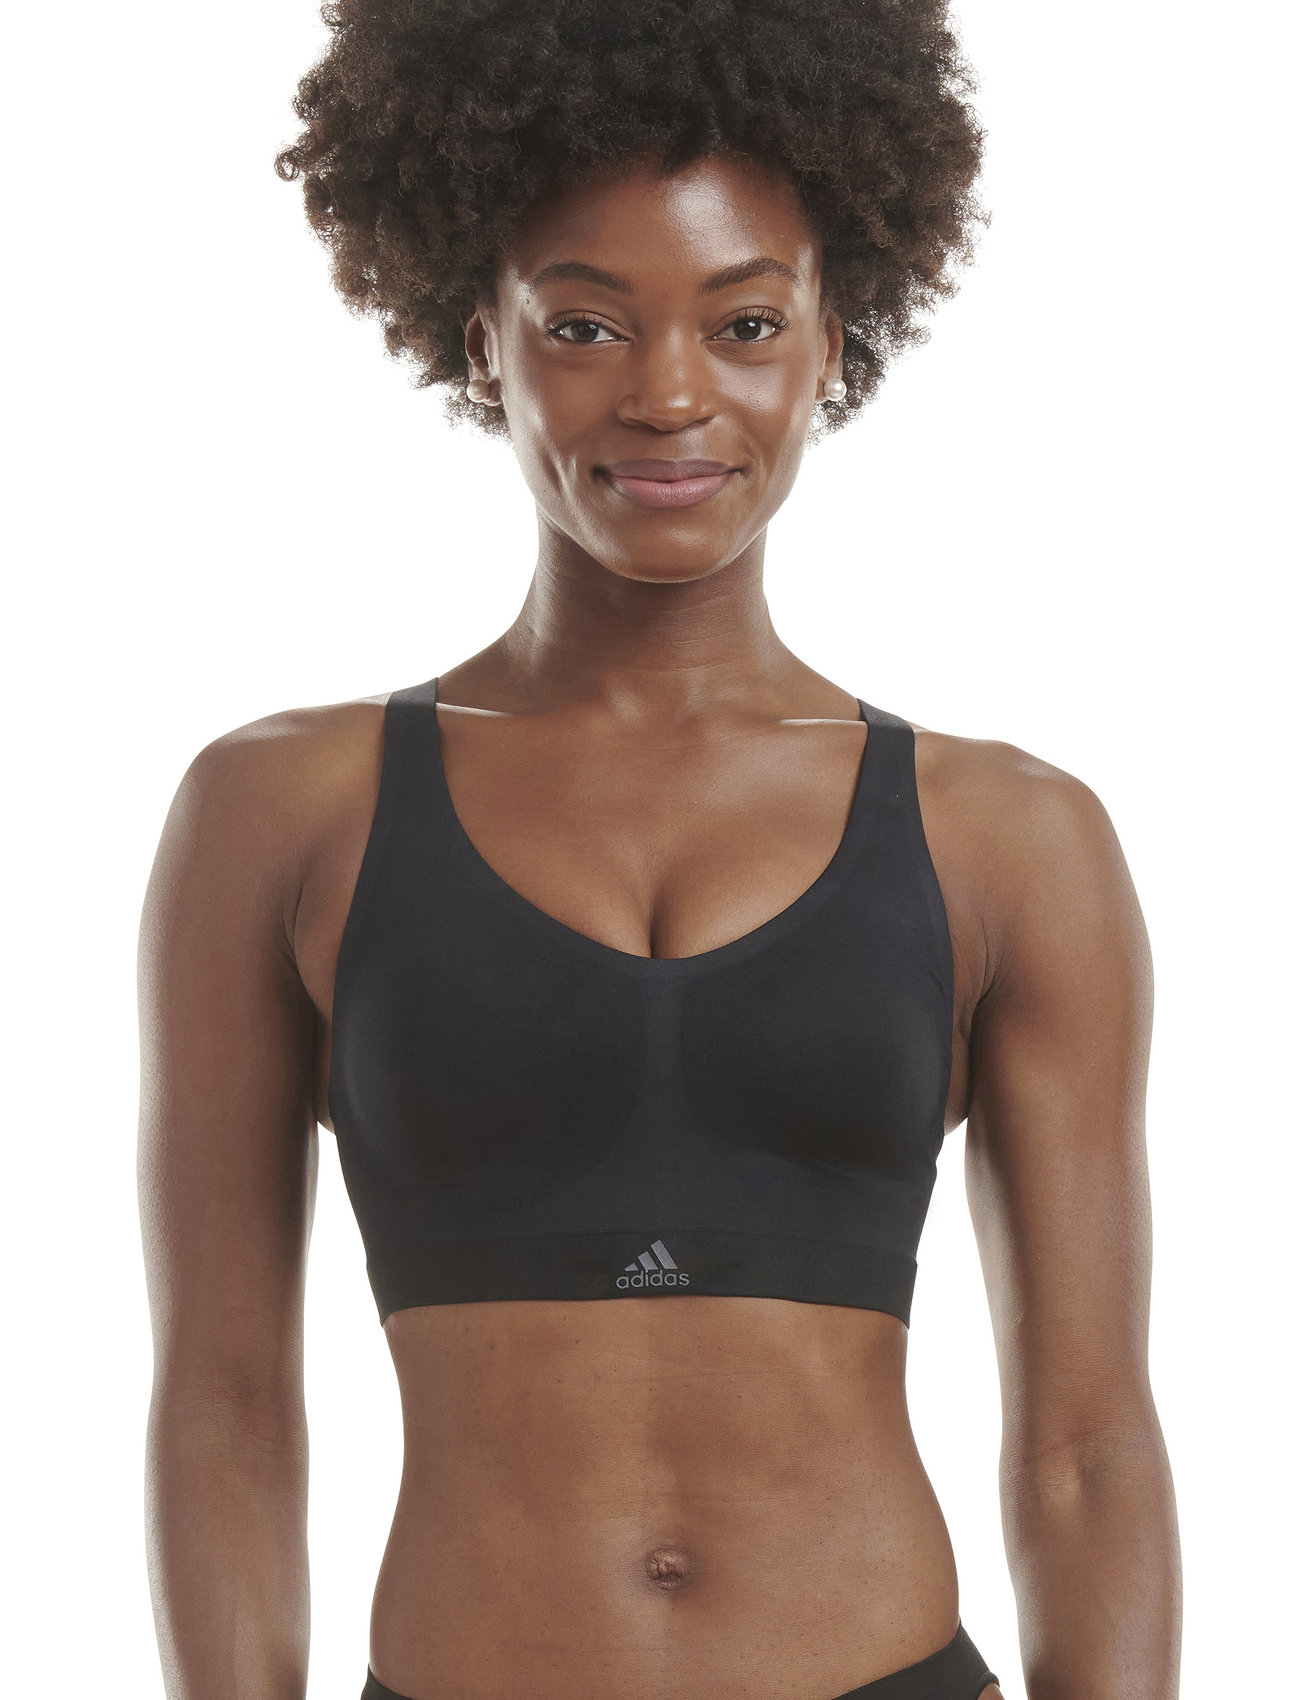 adidas Stronger for It Womens Sports Bra - Black Size 34a for sale online